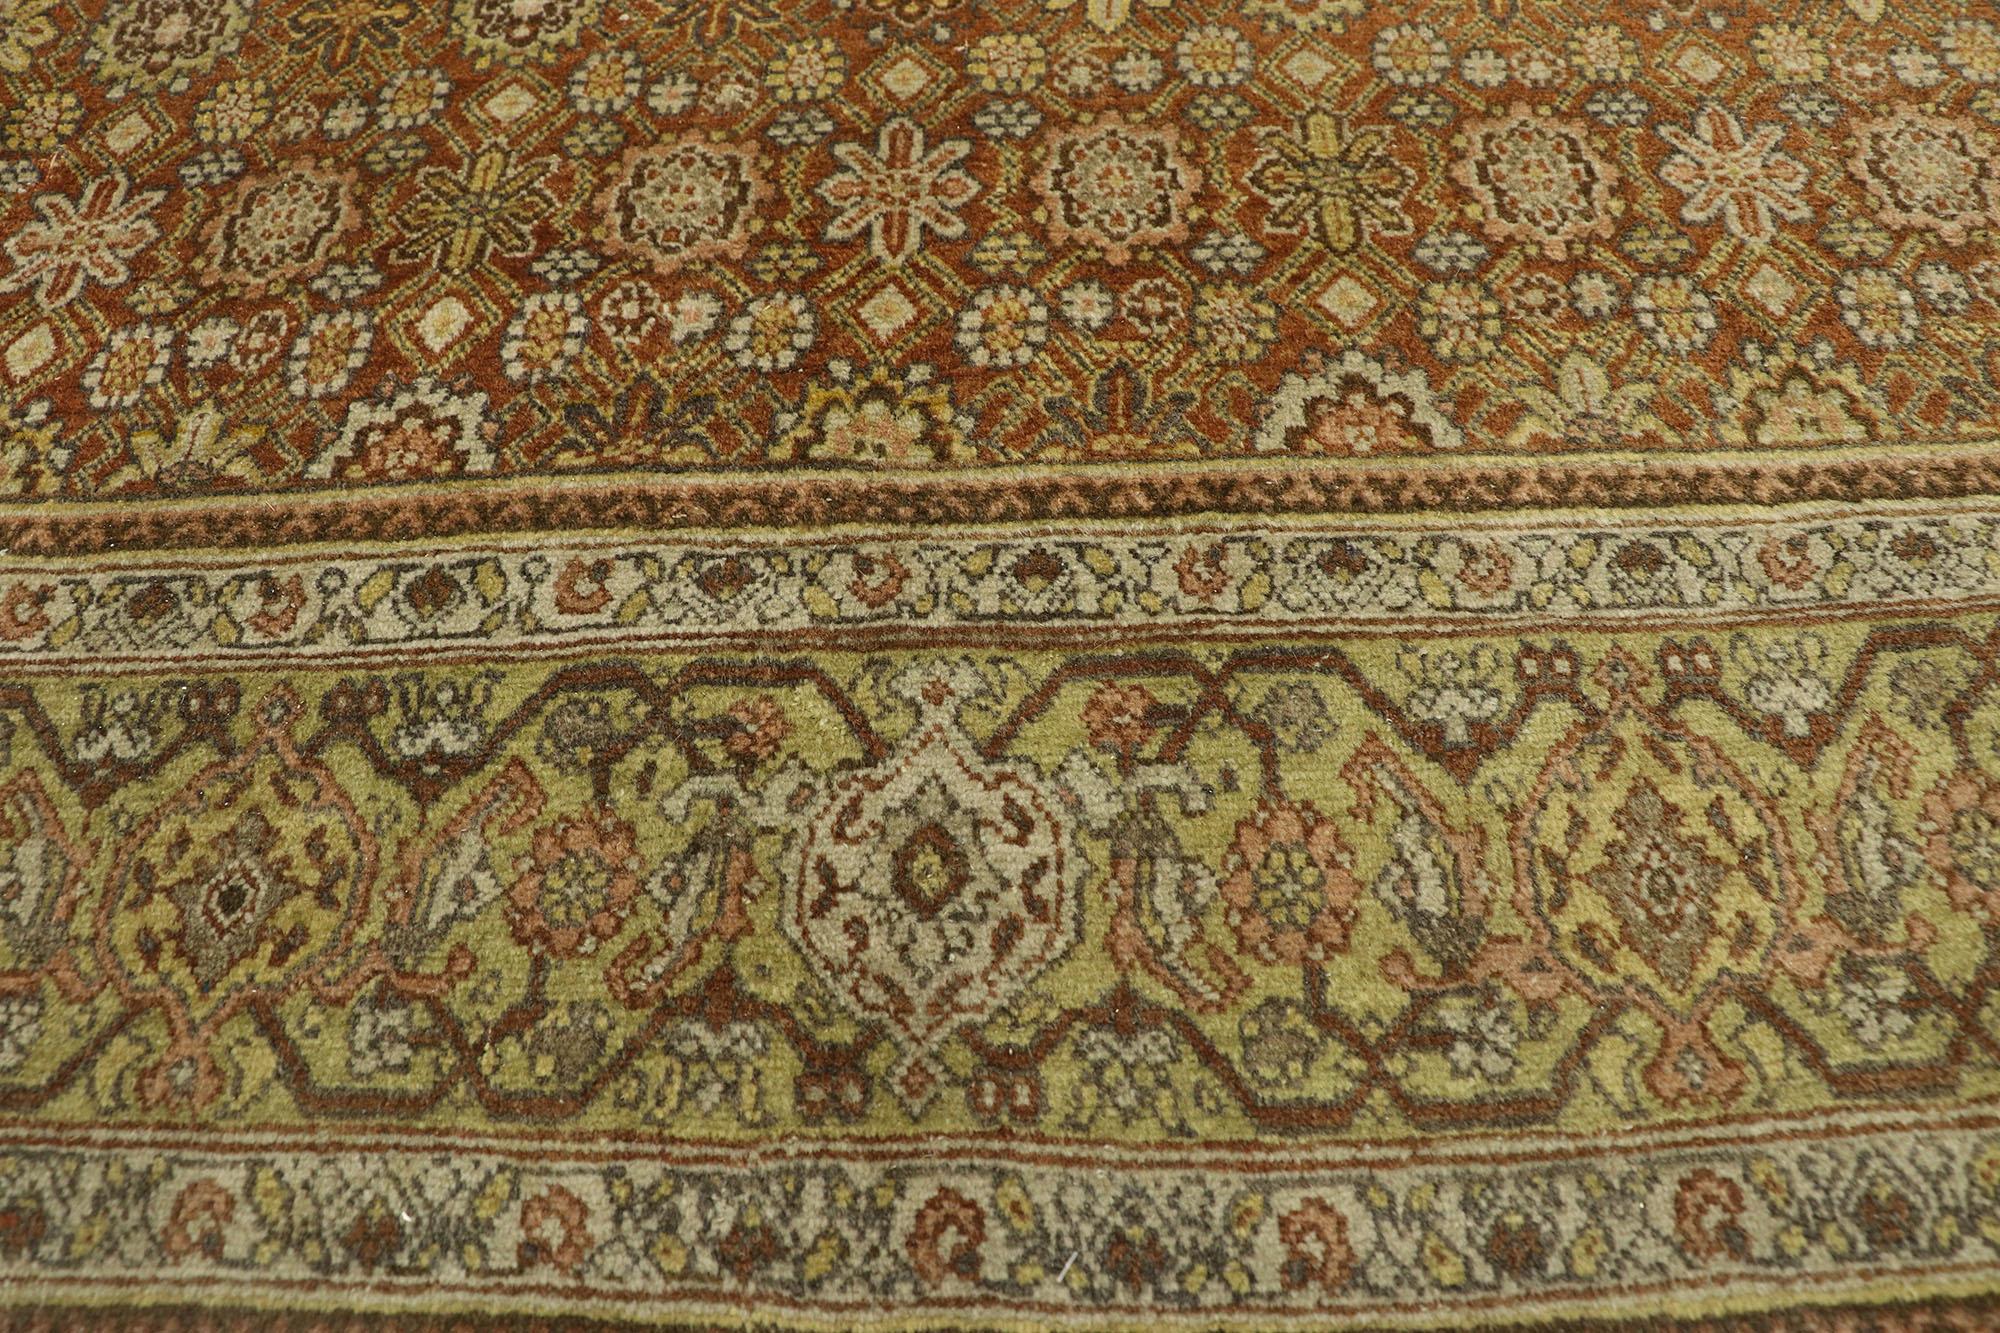 Antique Persian Tabriz Rug with Arts & Crafts Style In Good Condition For Sale In Dallas, TX